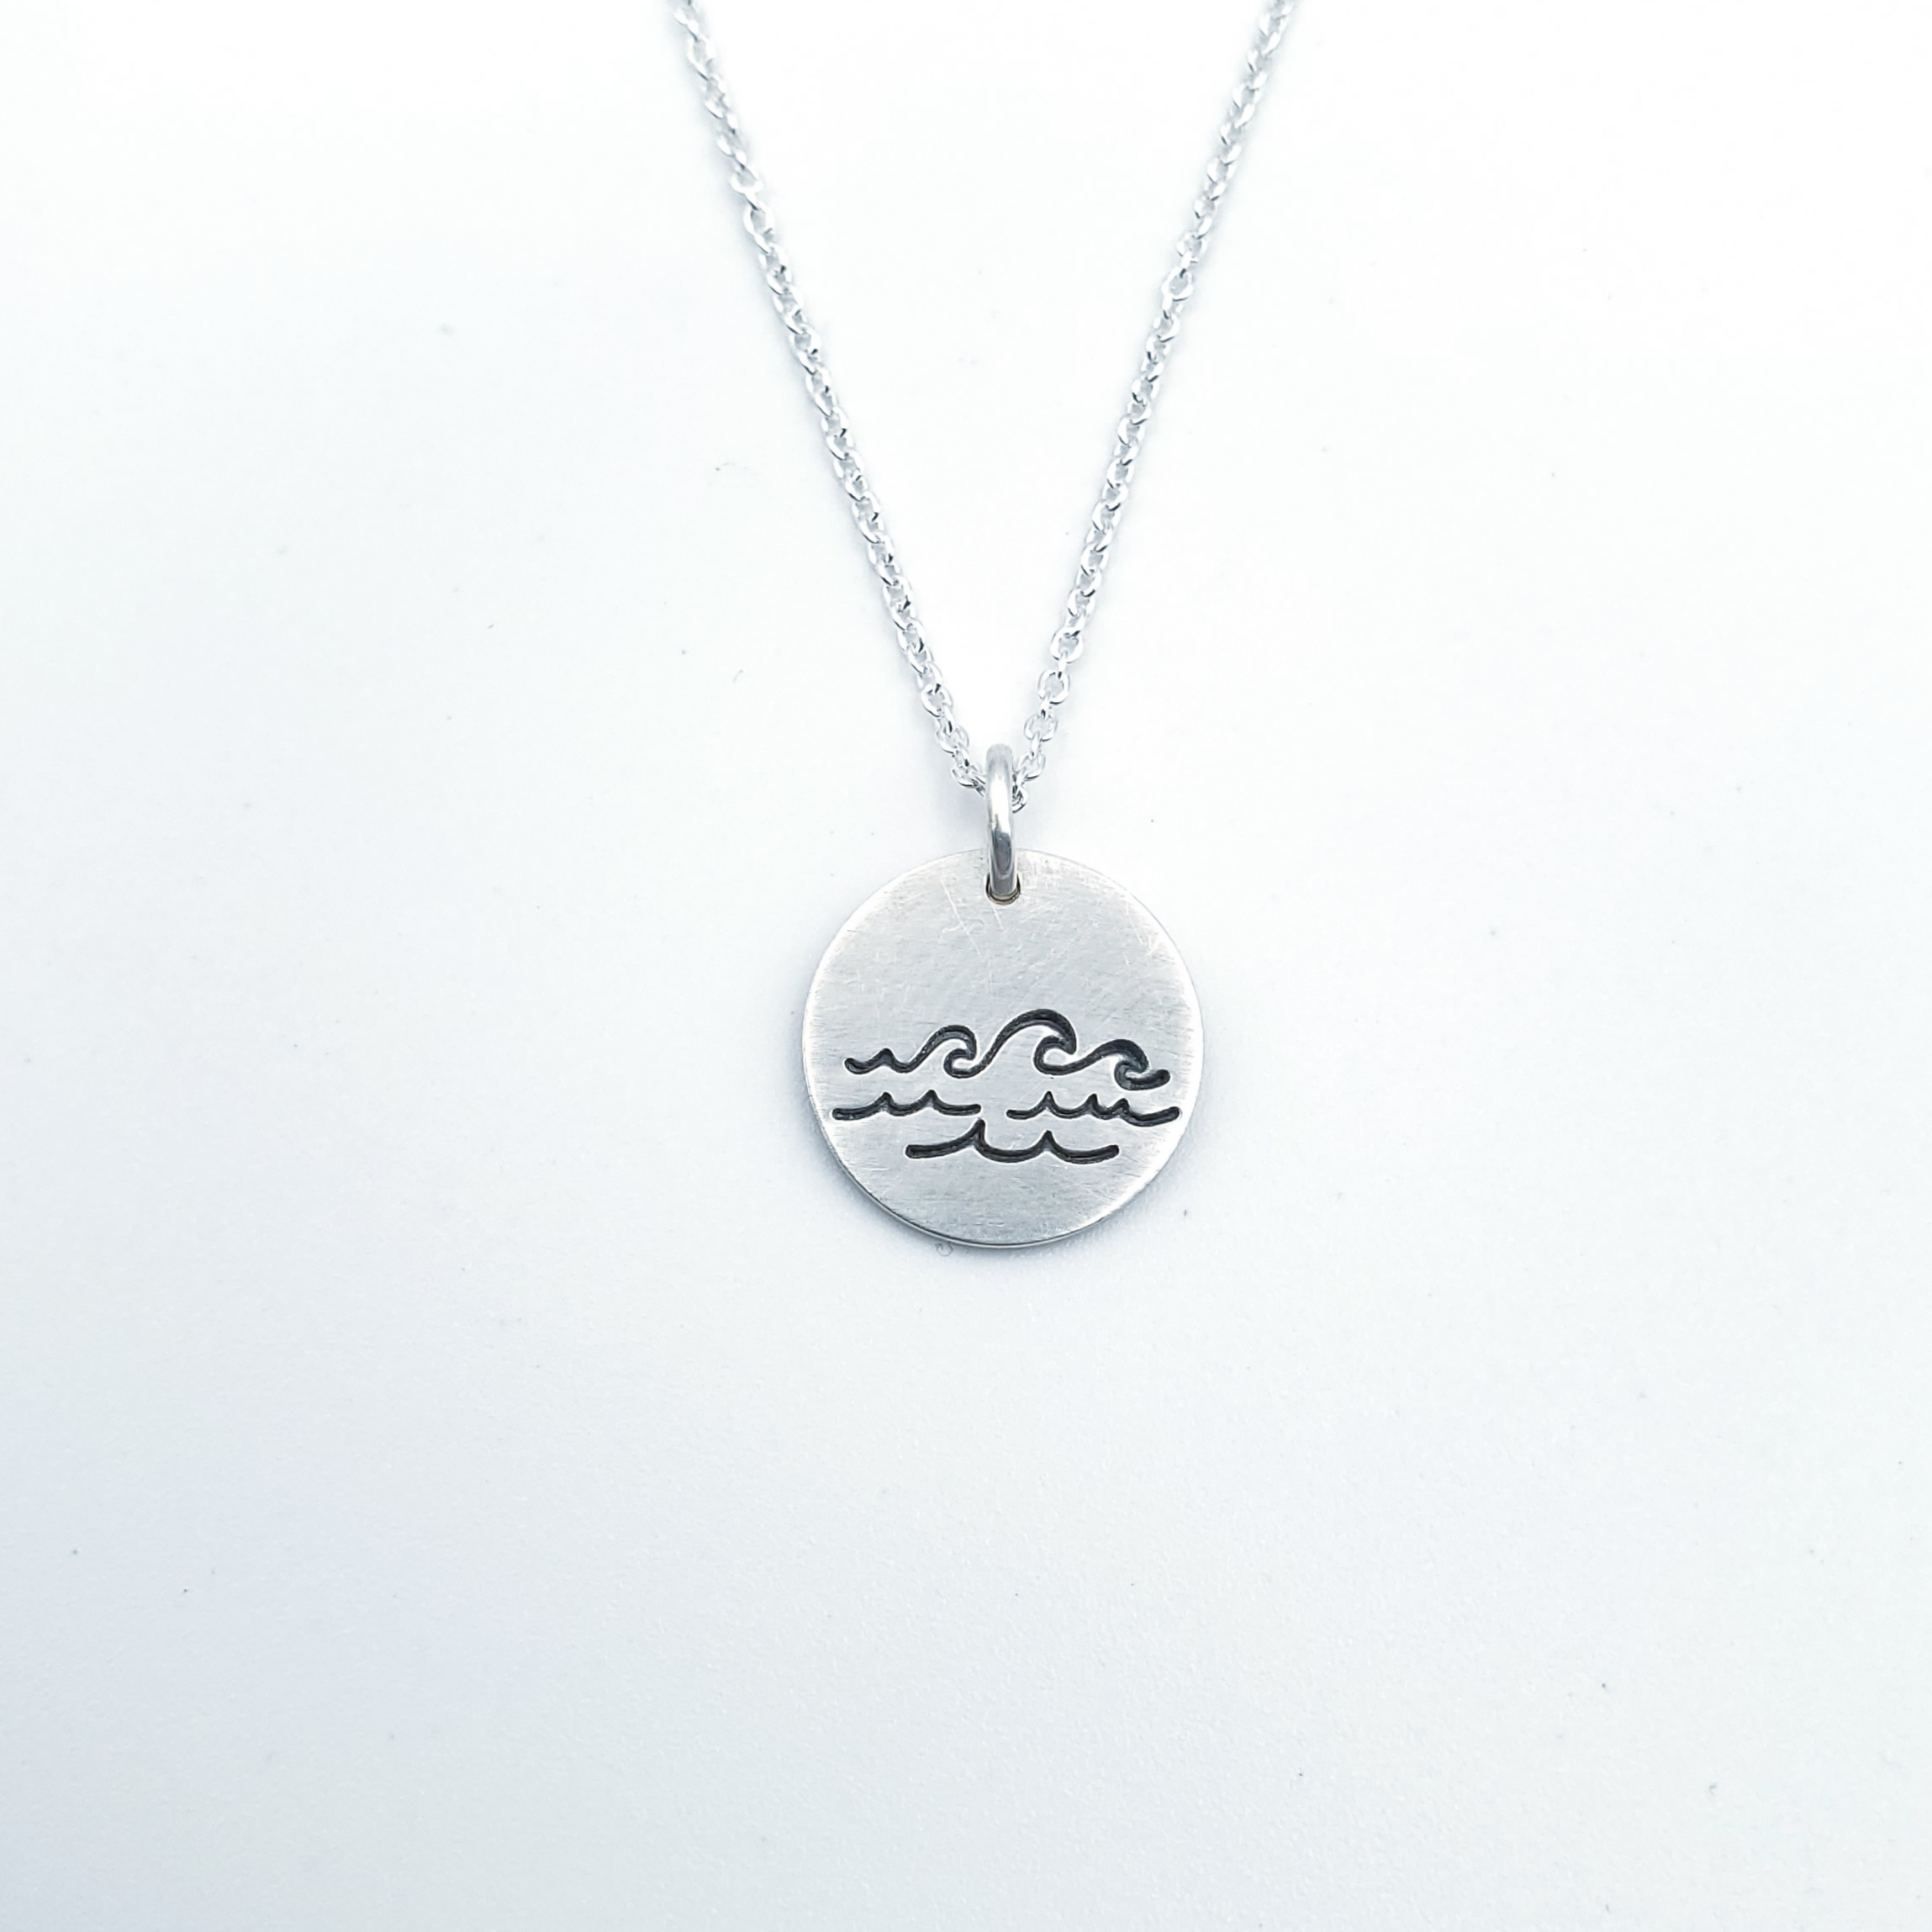 Waves necklace sterling silver